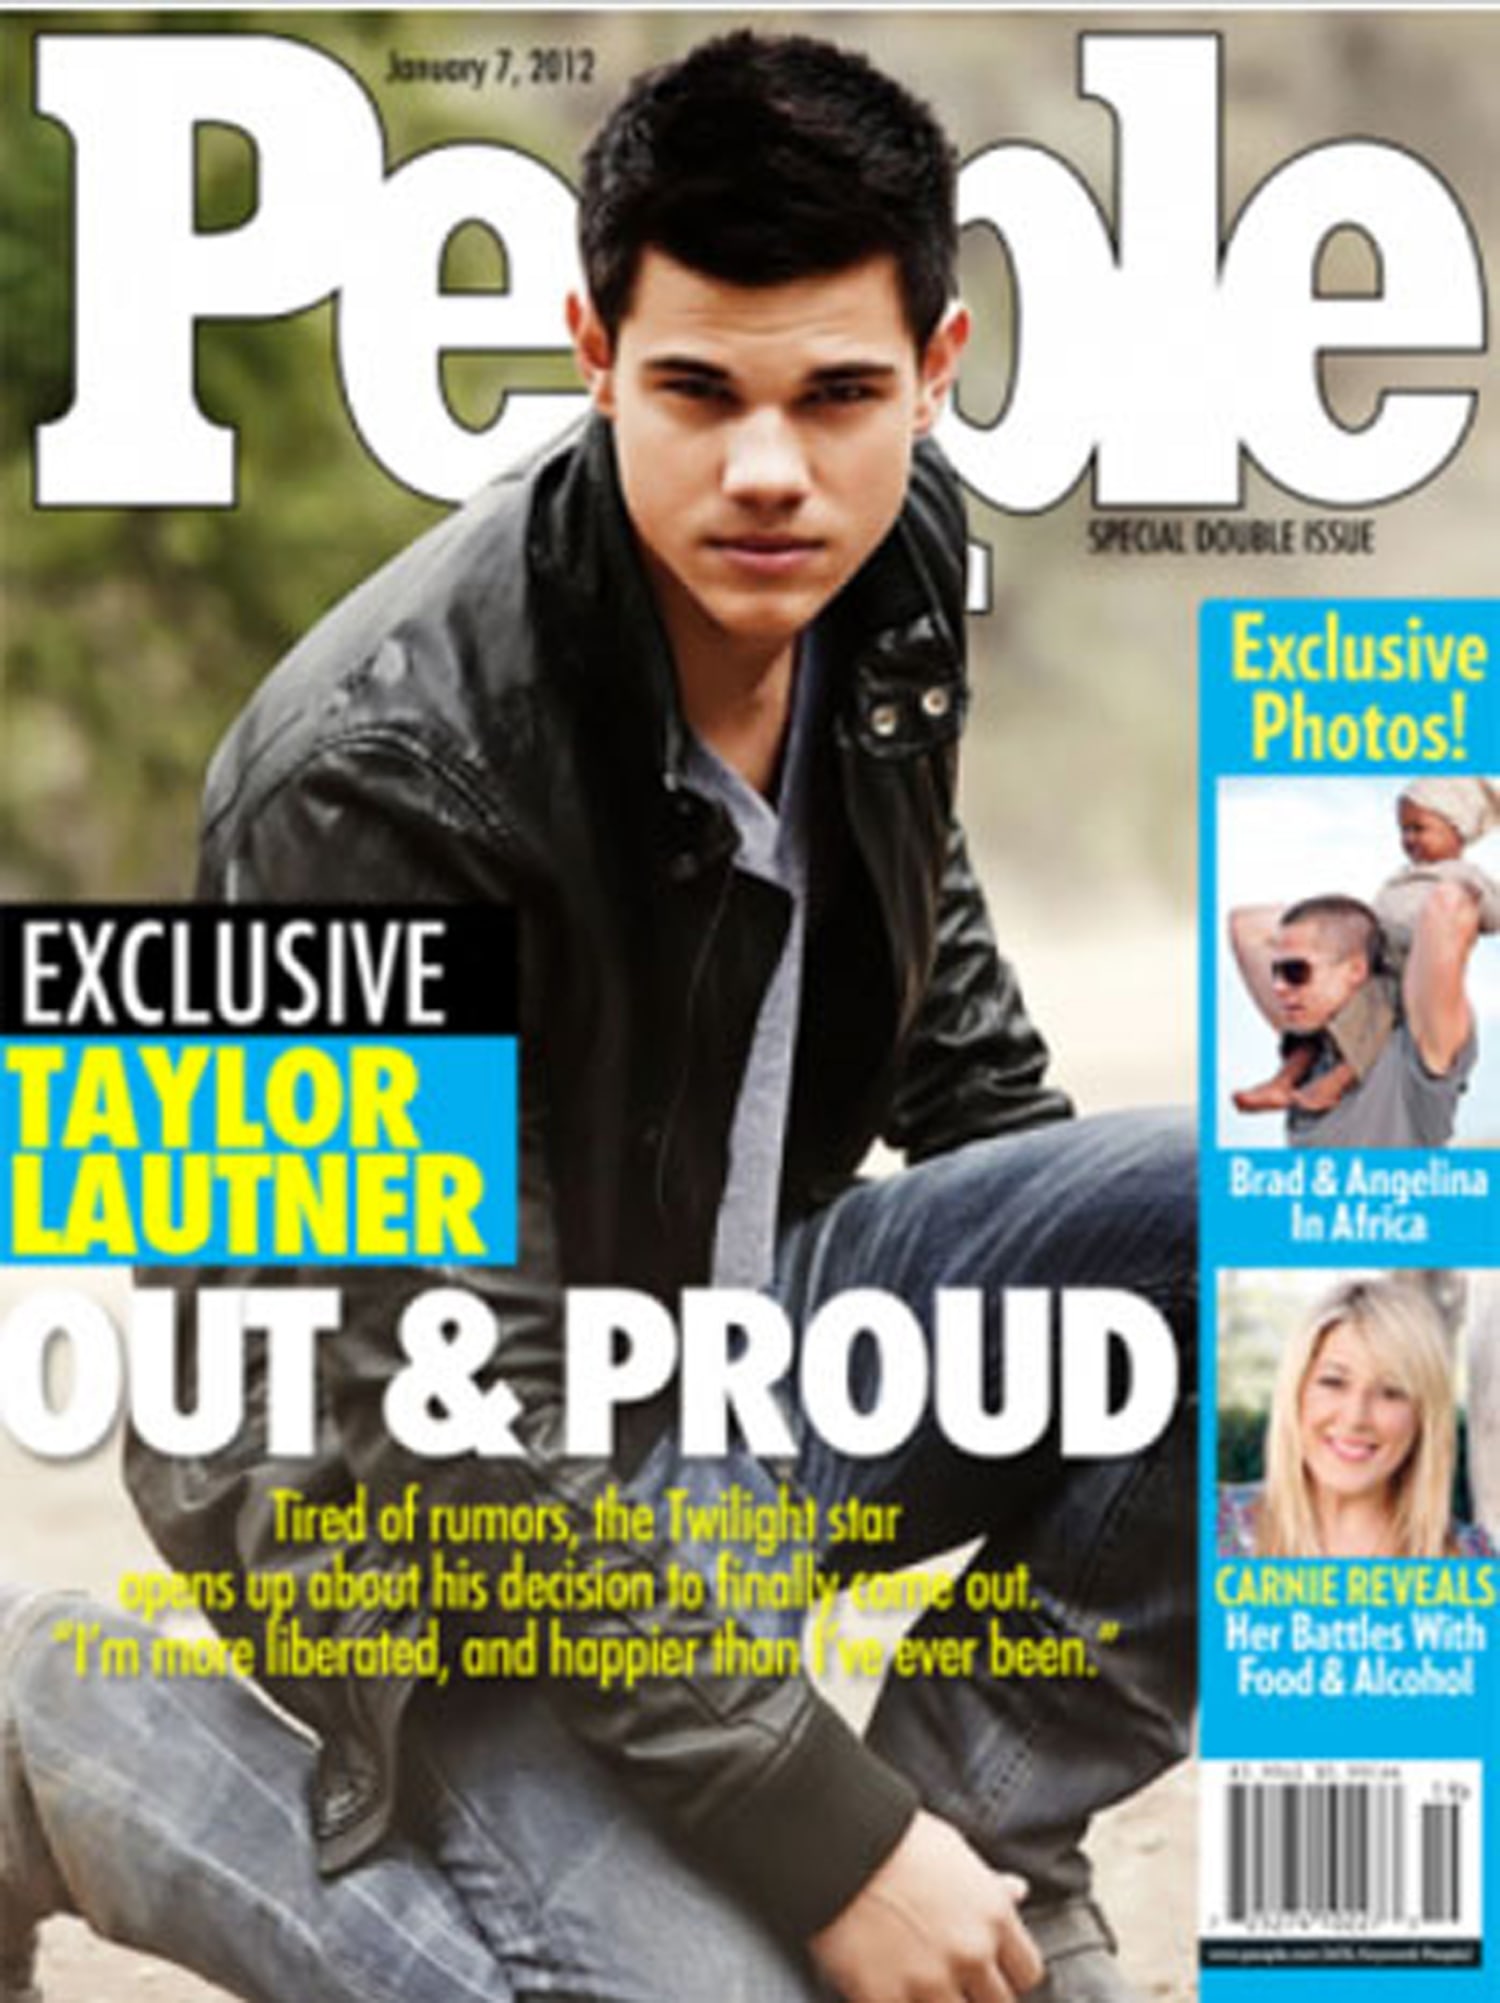 alan wyn jones recommends taylor lautner nude fakes pic